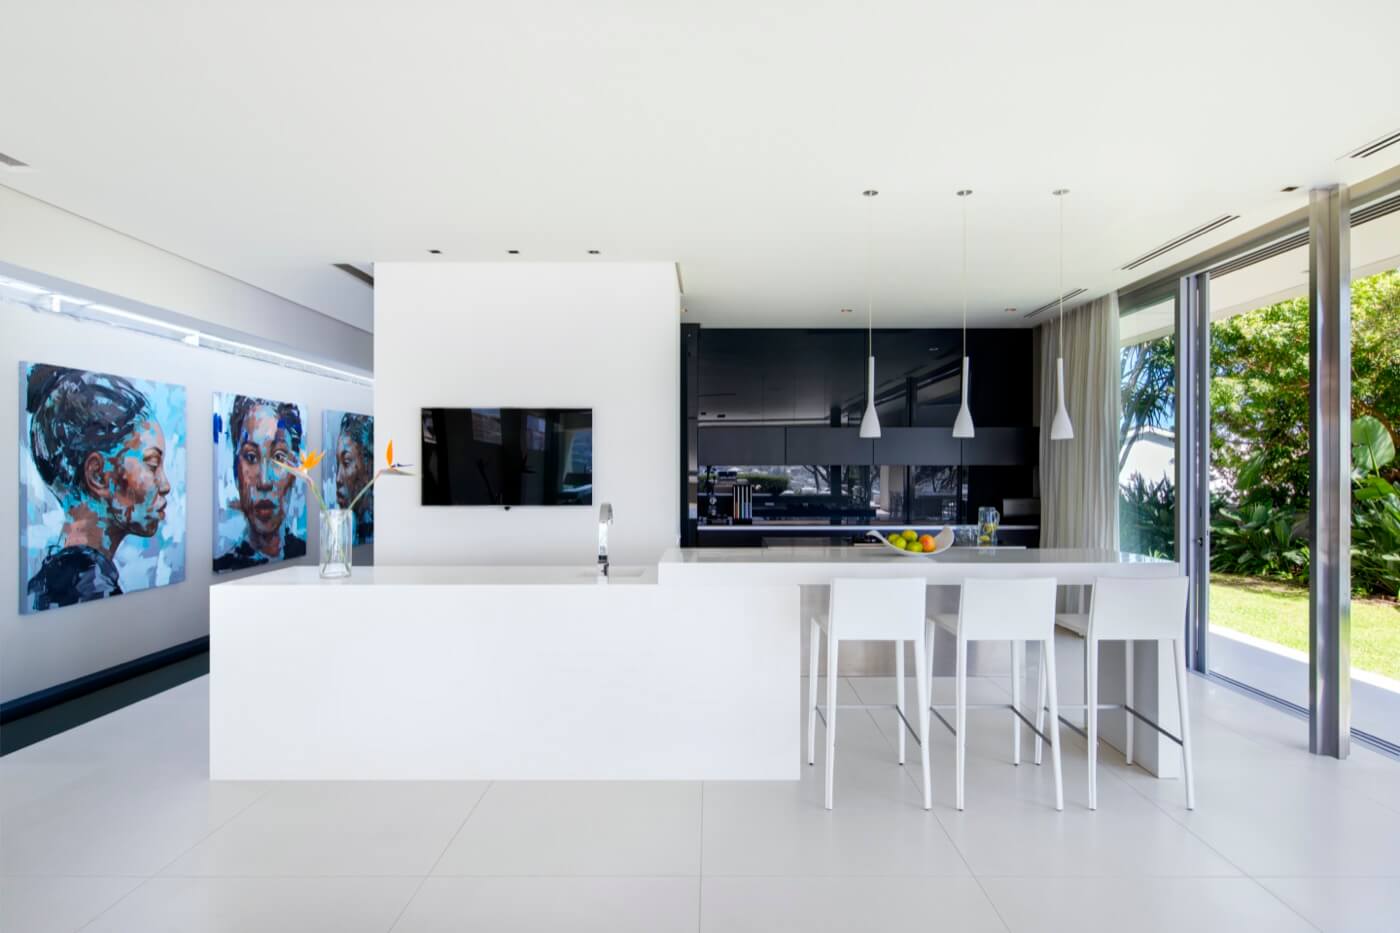 Photo 20 of The Crescent accommodation in Camps Bay, Cape Town with 6 bedrooms and 6.5 bathrooms